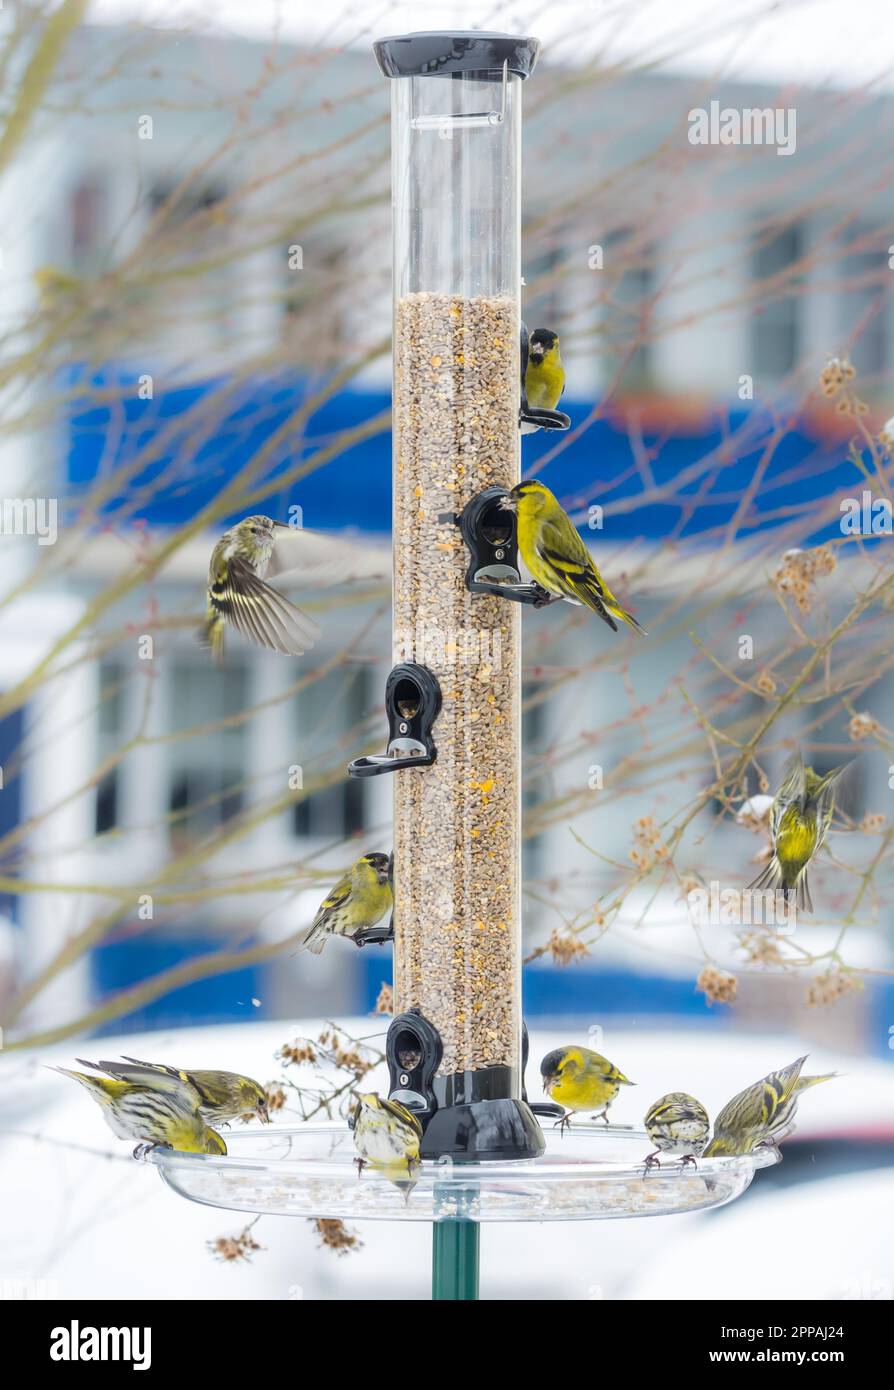 Swarm of eurasian siskin birds on a bird feeder with a house in the background Stock Photo